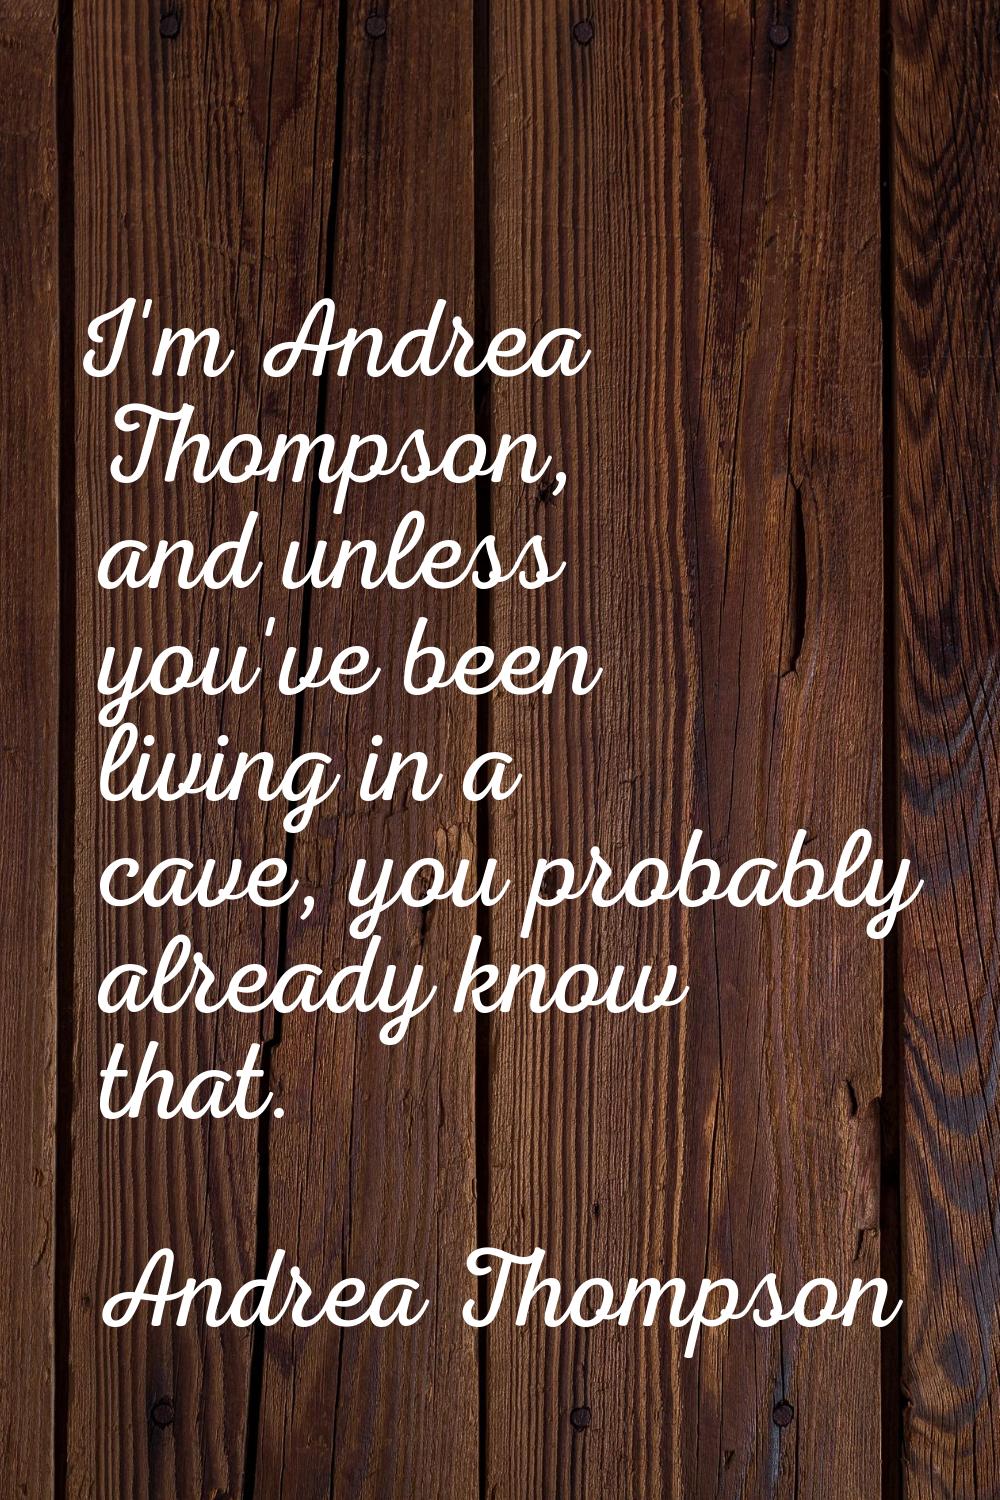 I'm Andrea Thompson, and unless you've been living in a cave, you probably already know that.